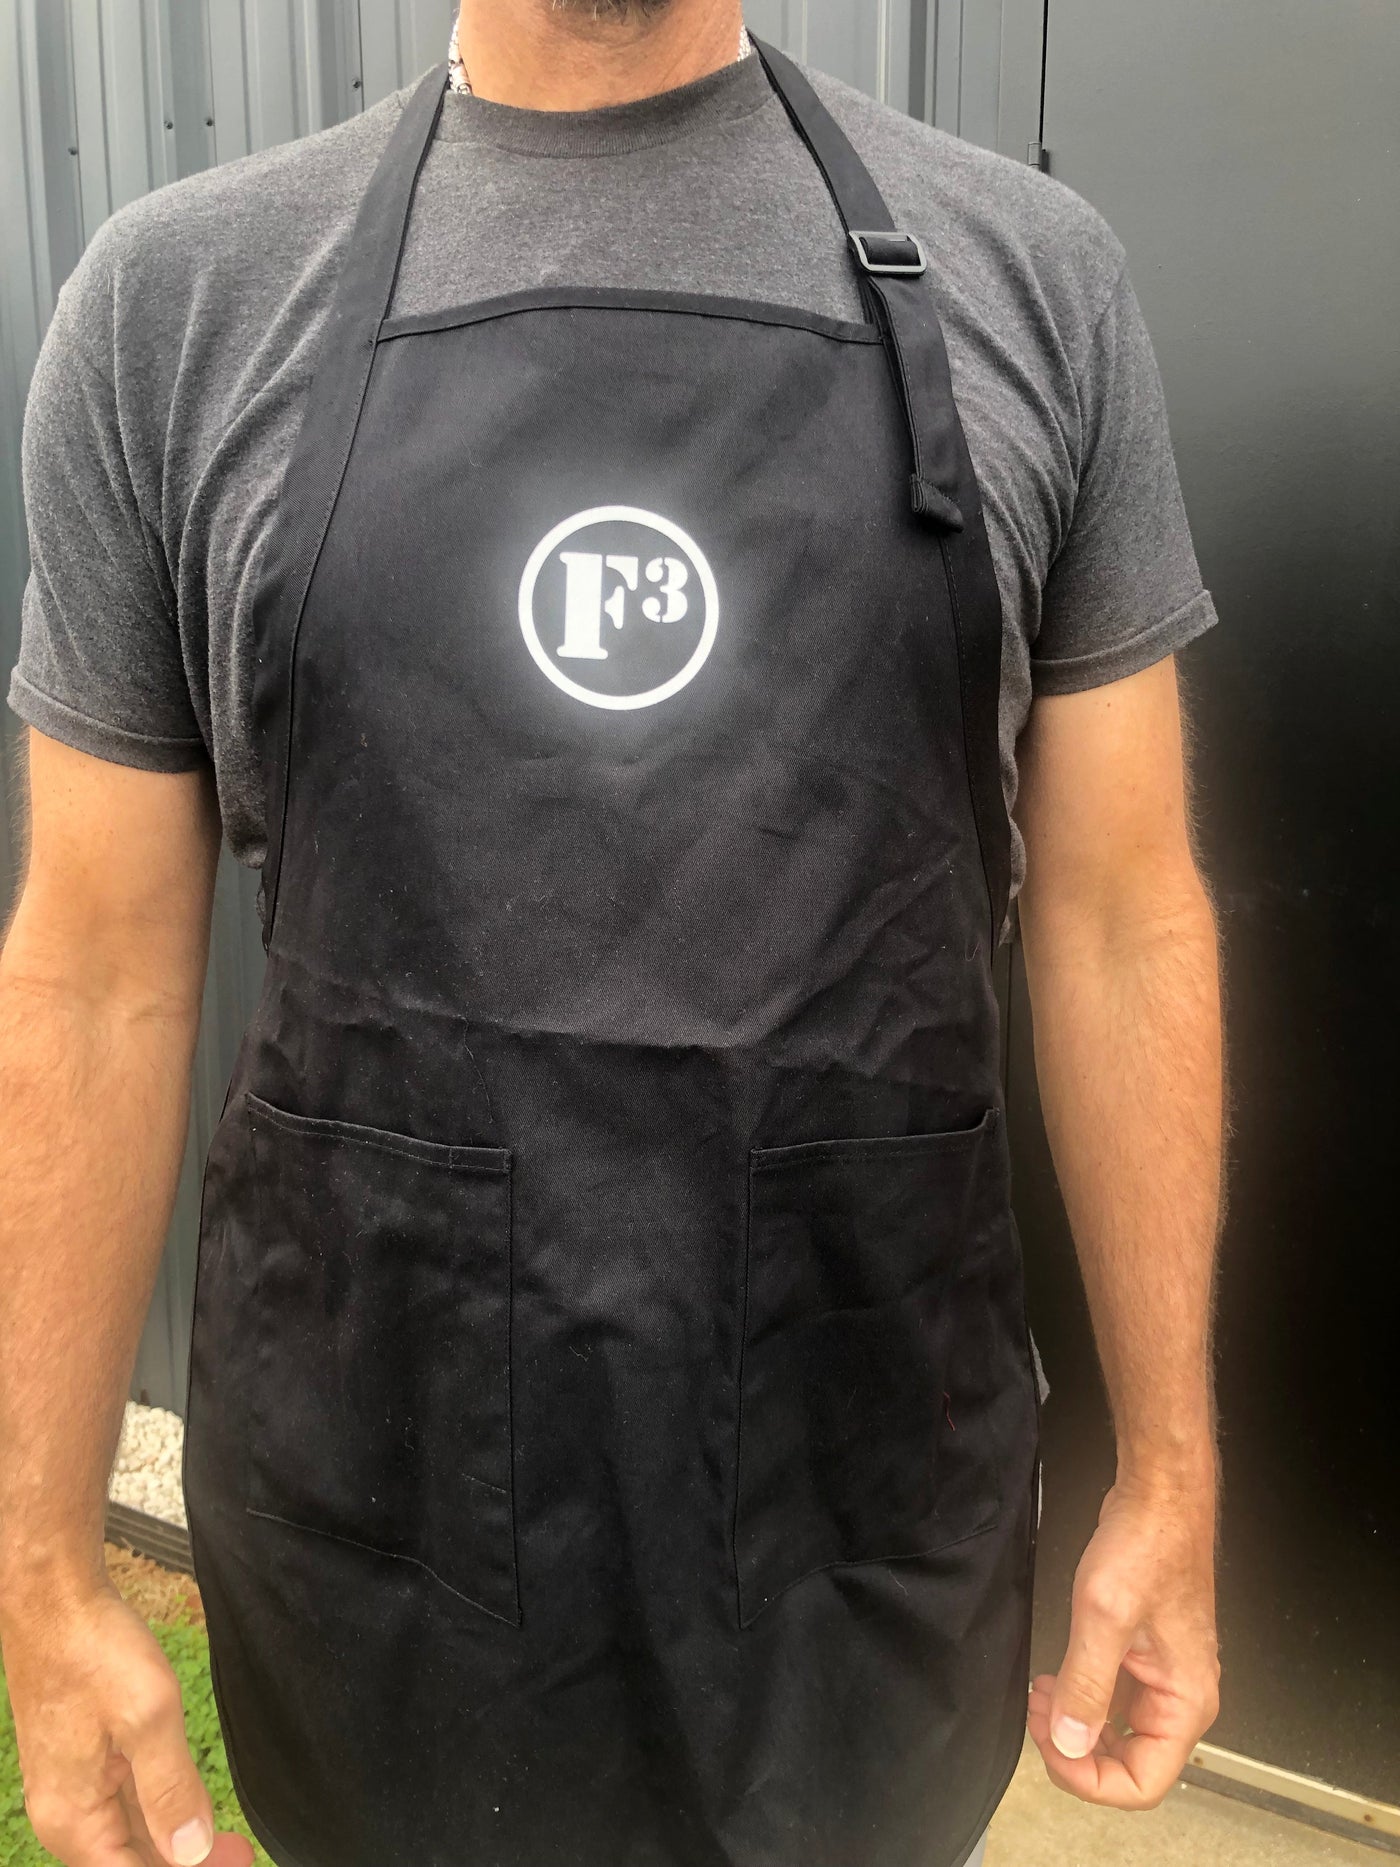 F3 Port Authority Full-Length Apron with Pockets - Made to Order